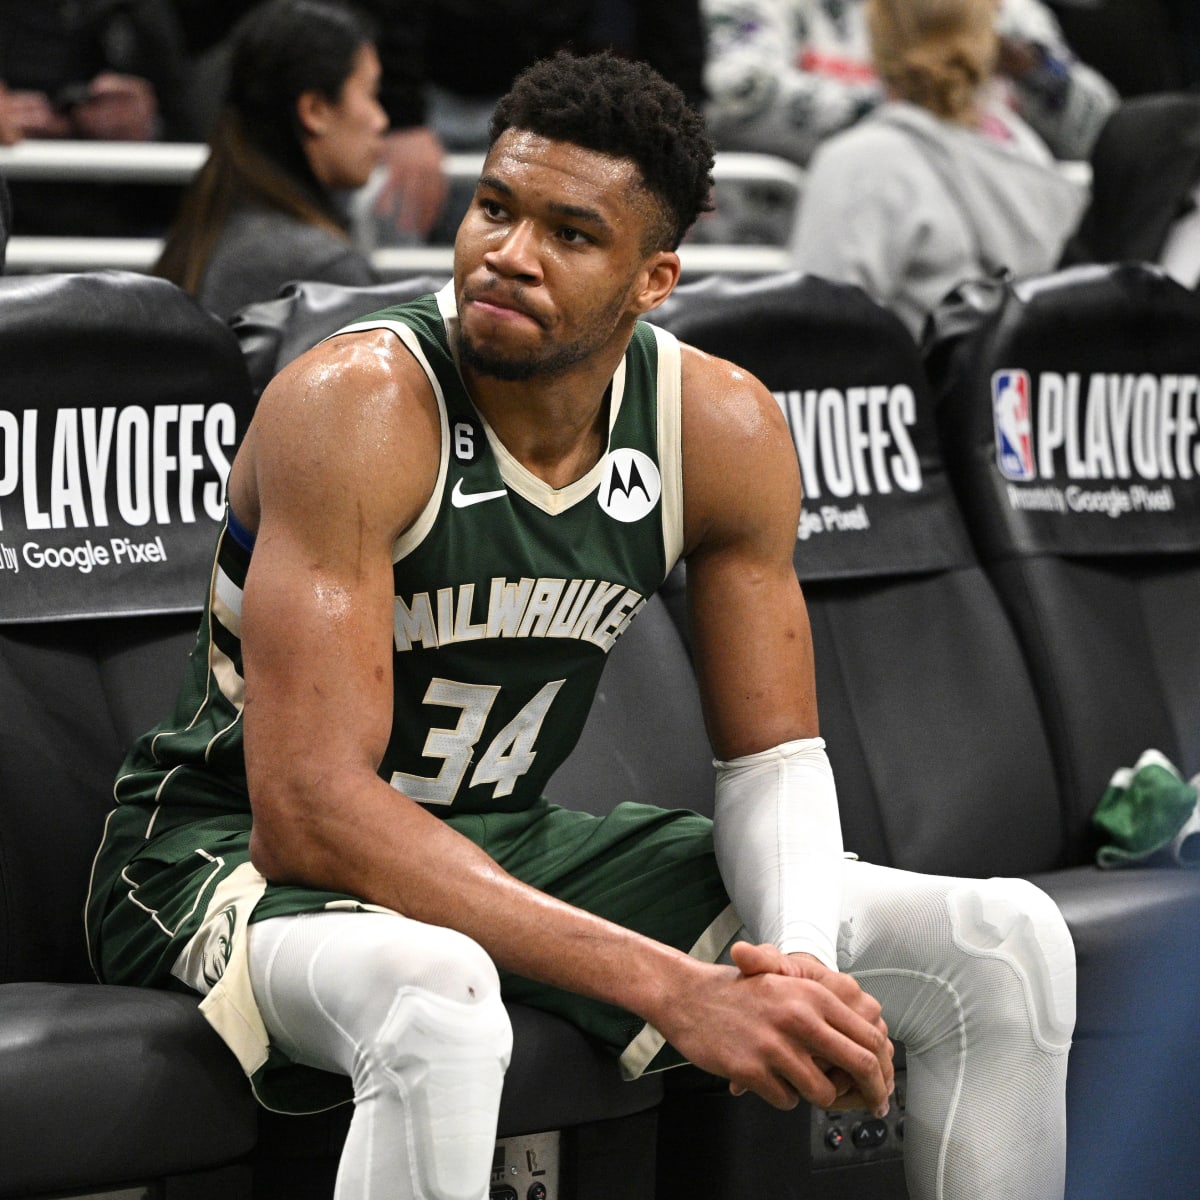 Giannis will not play in FIBA Basketball World Cup